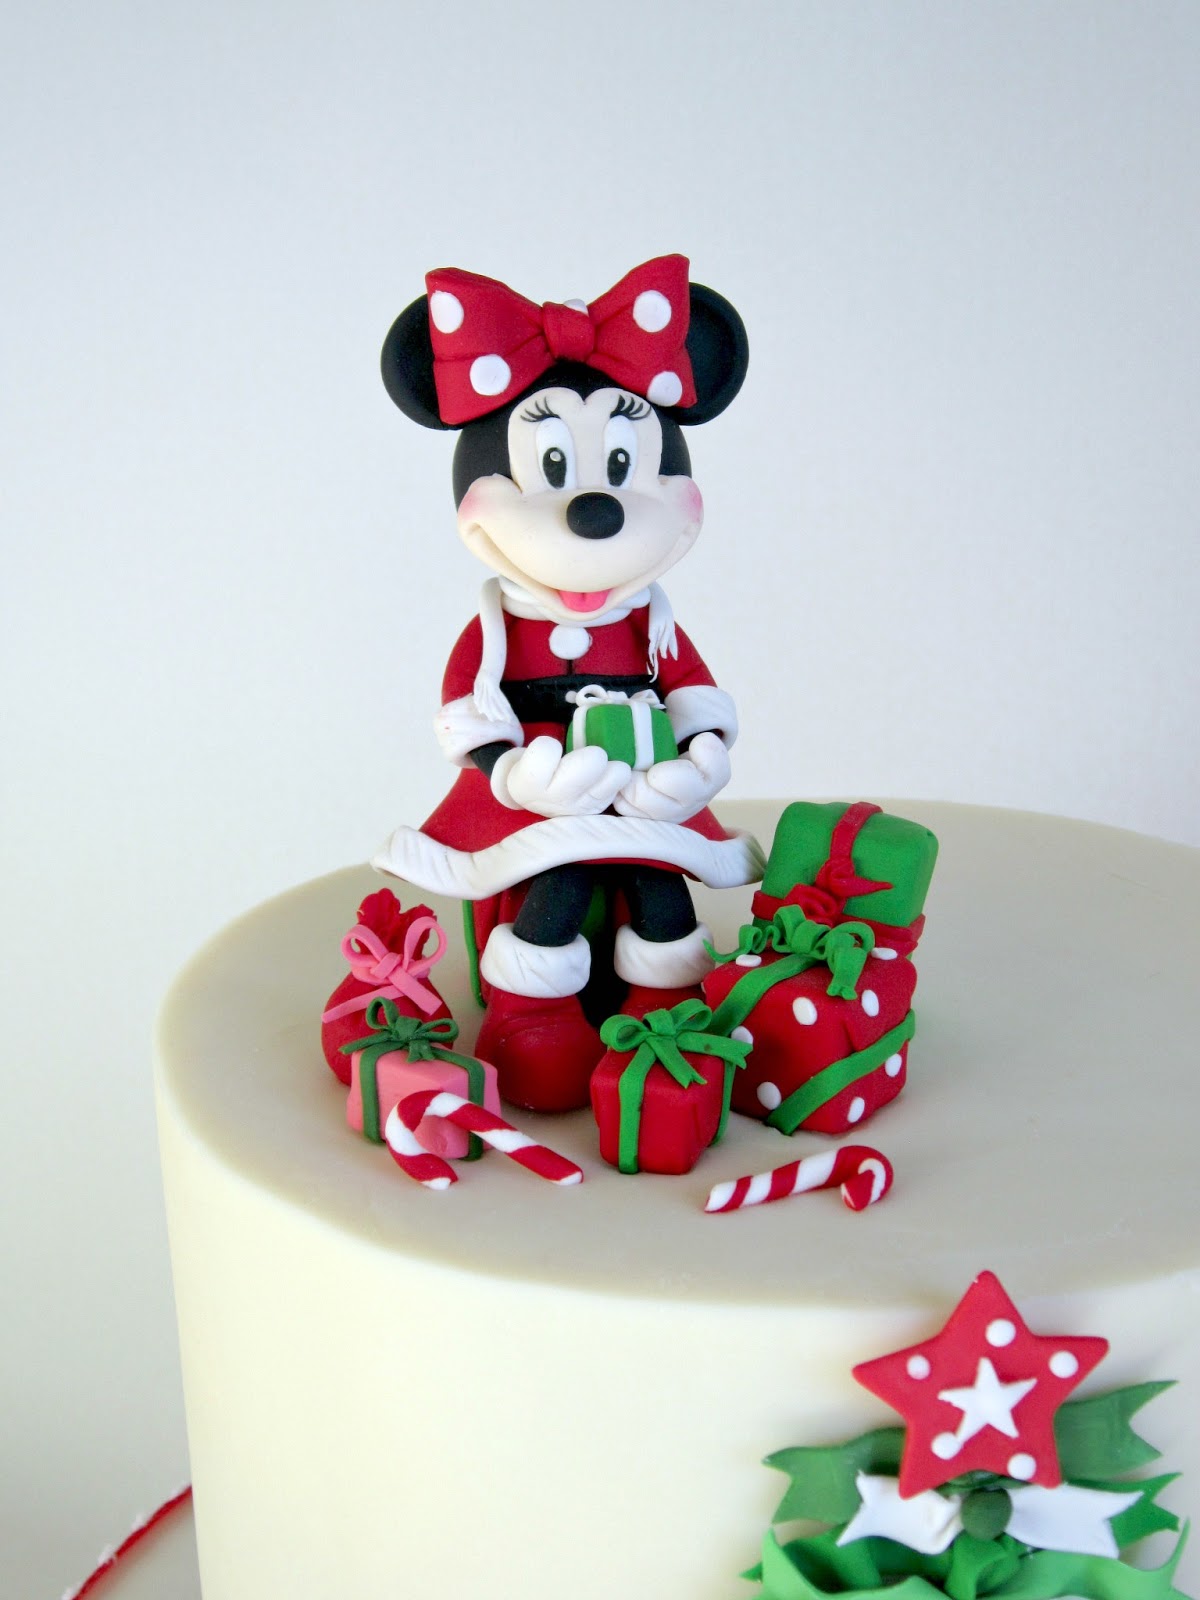 Delectable Cakes: Adorable Minnie Mouse 'Christmas ...